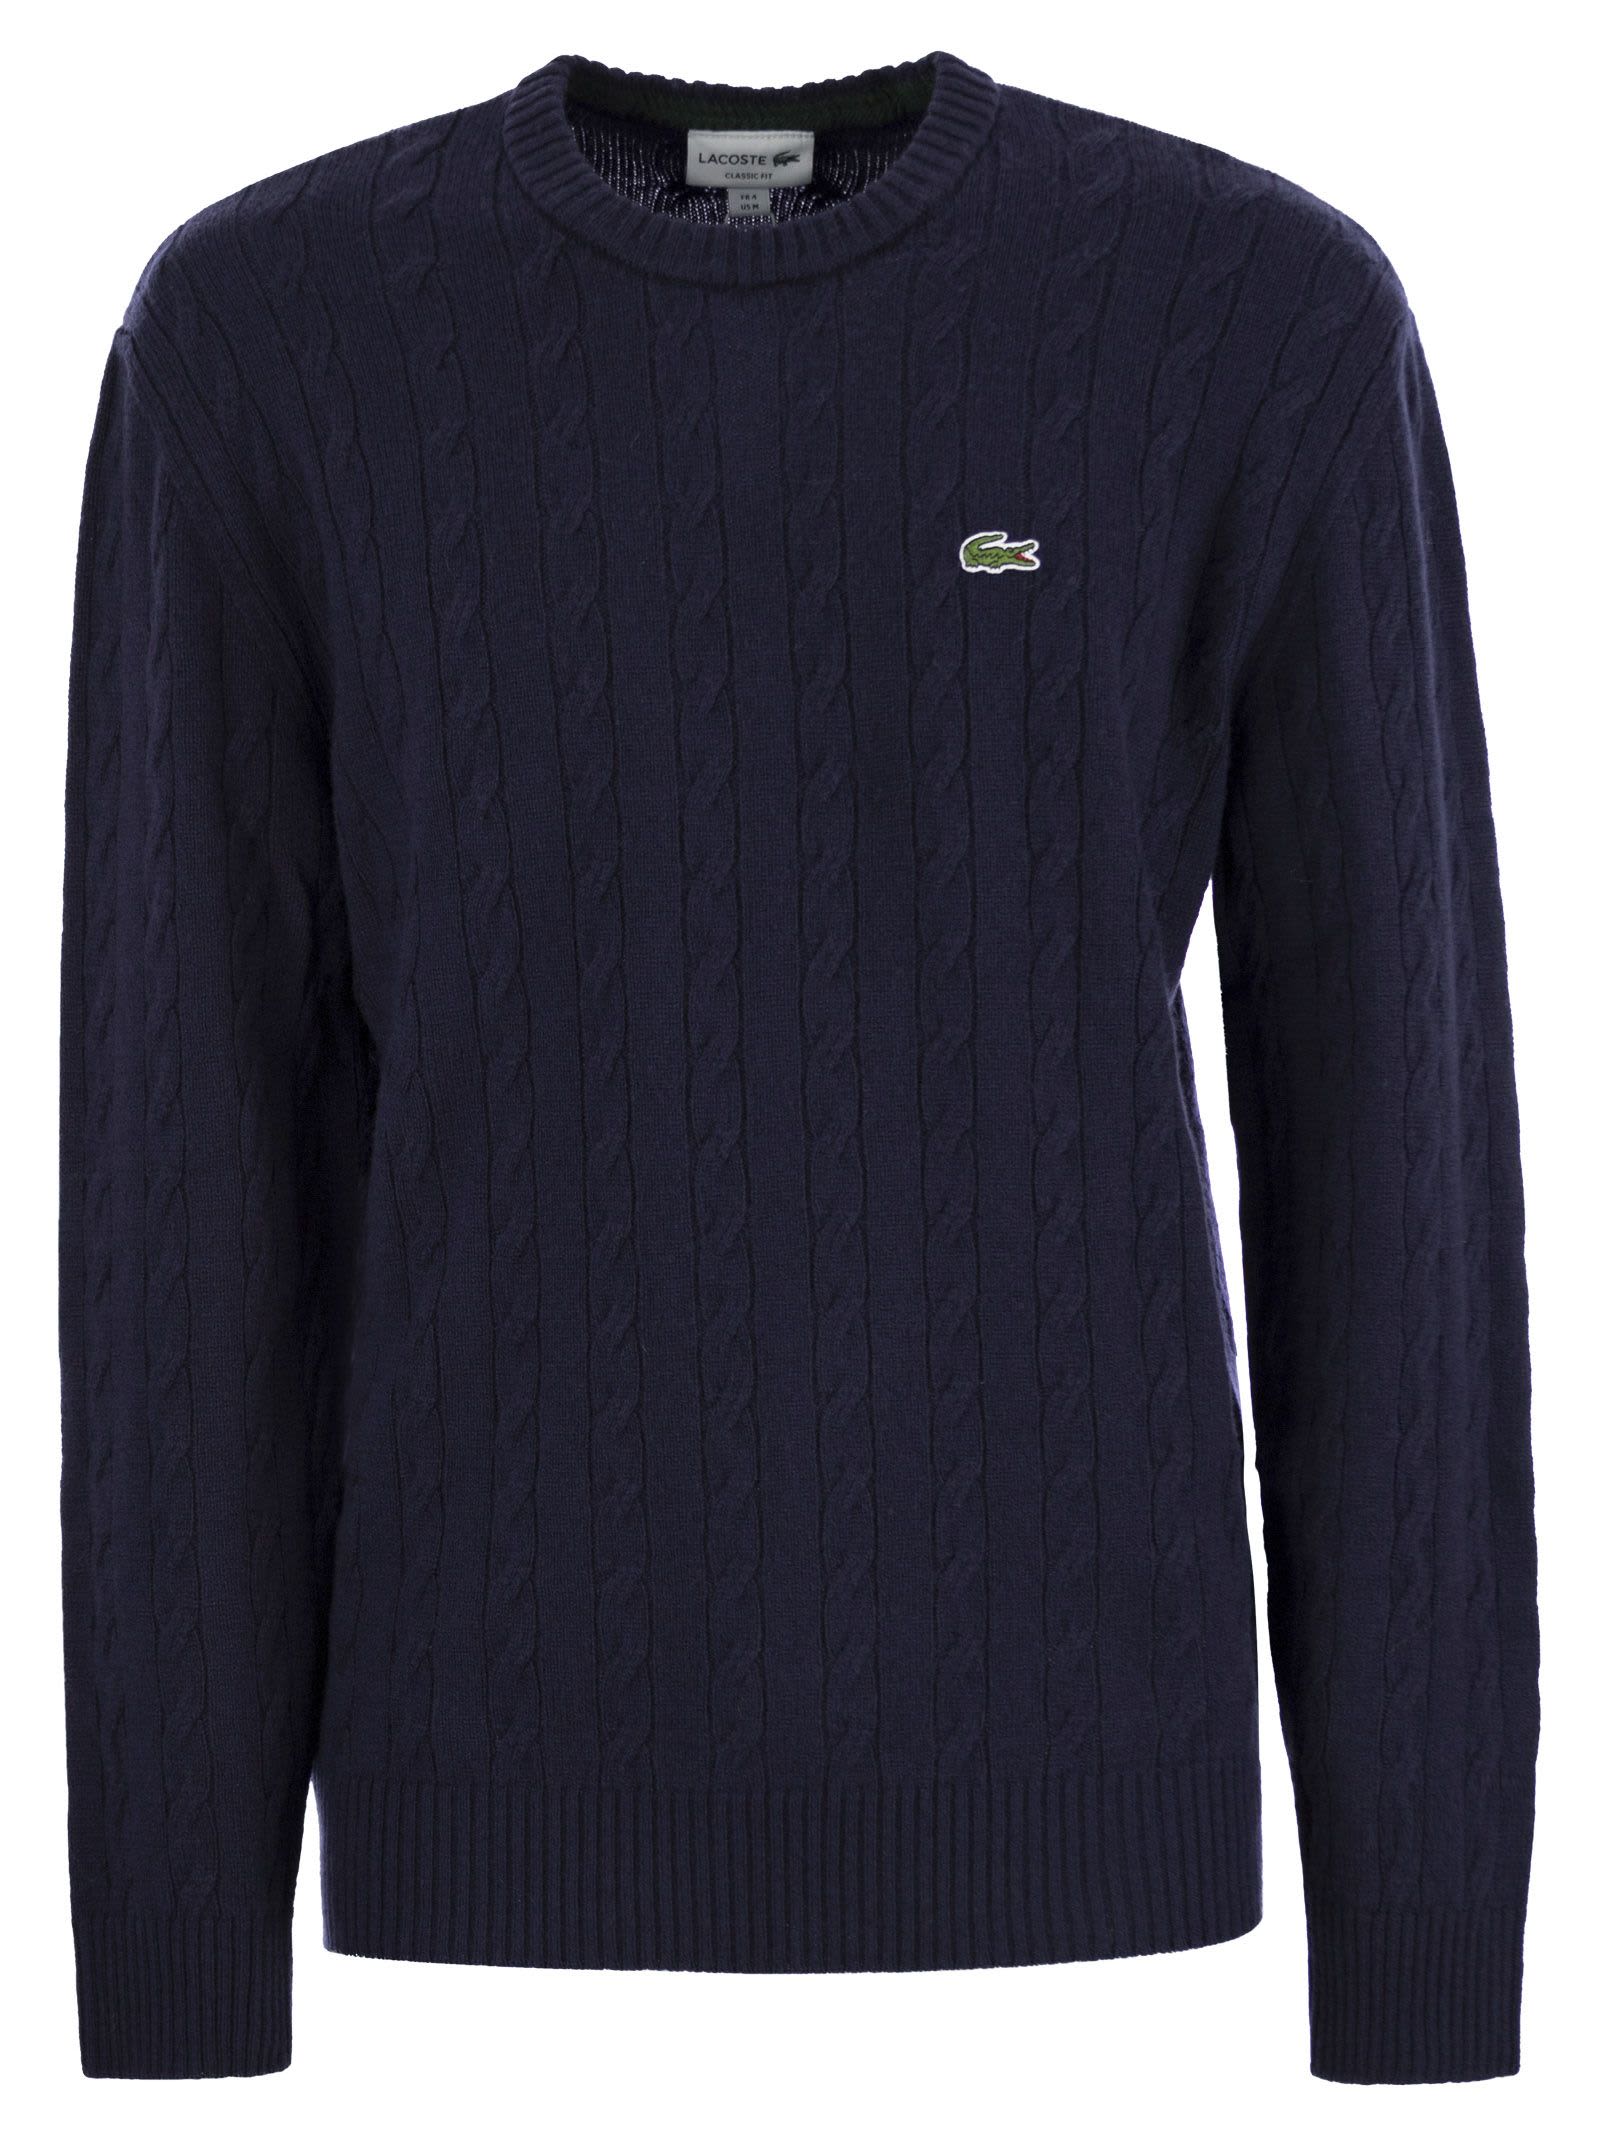 LACOSTE PLAITED WOOL CREW-NECK SWEATER